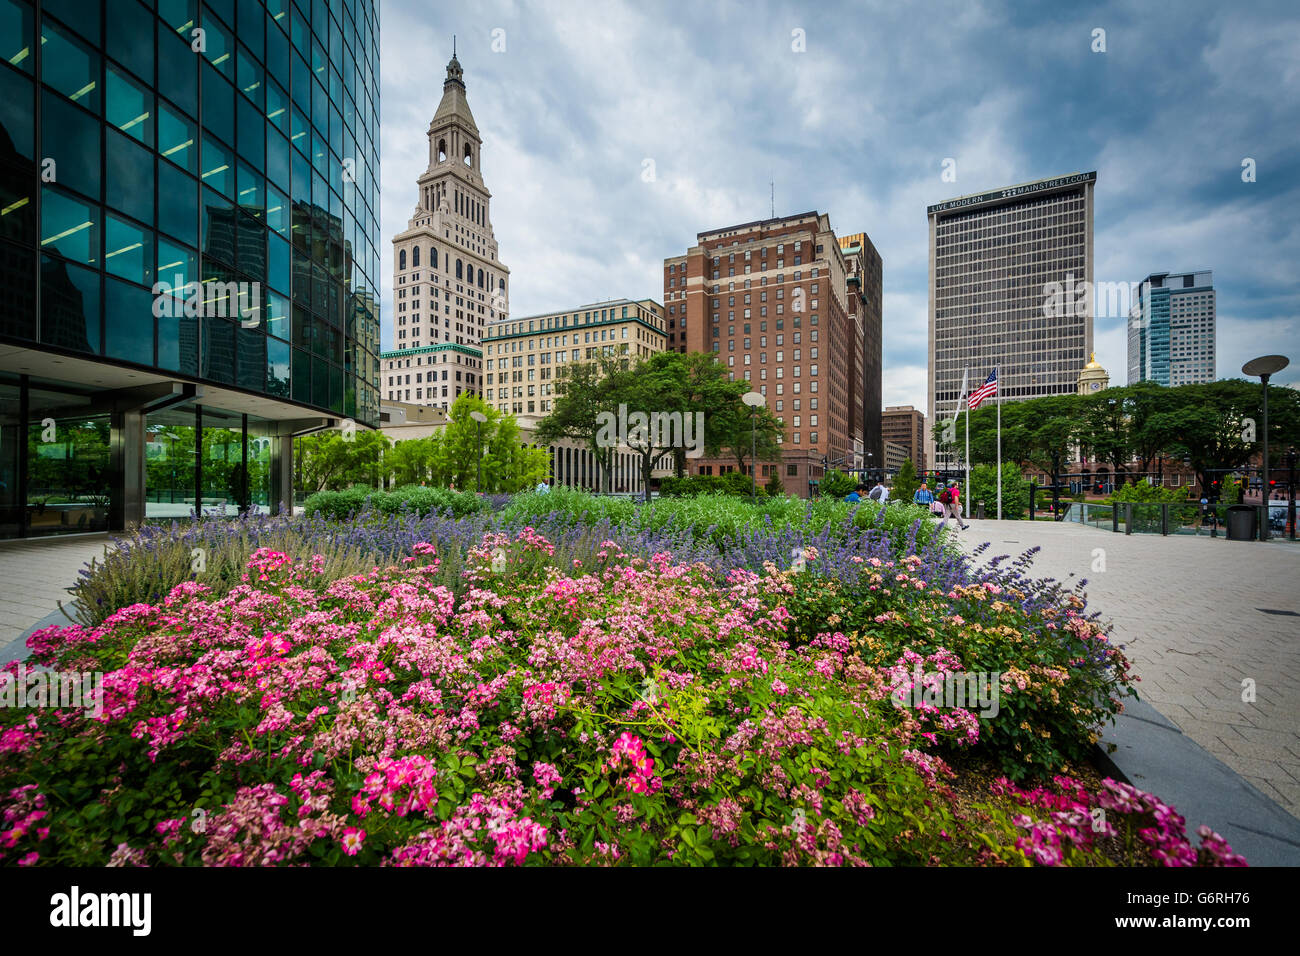 Gardens and buildings in downtown Hartford, Connecticut. Stock Photo